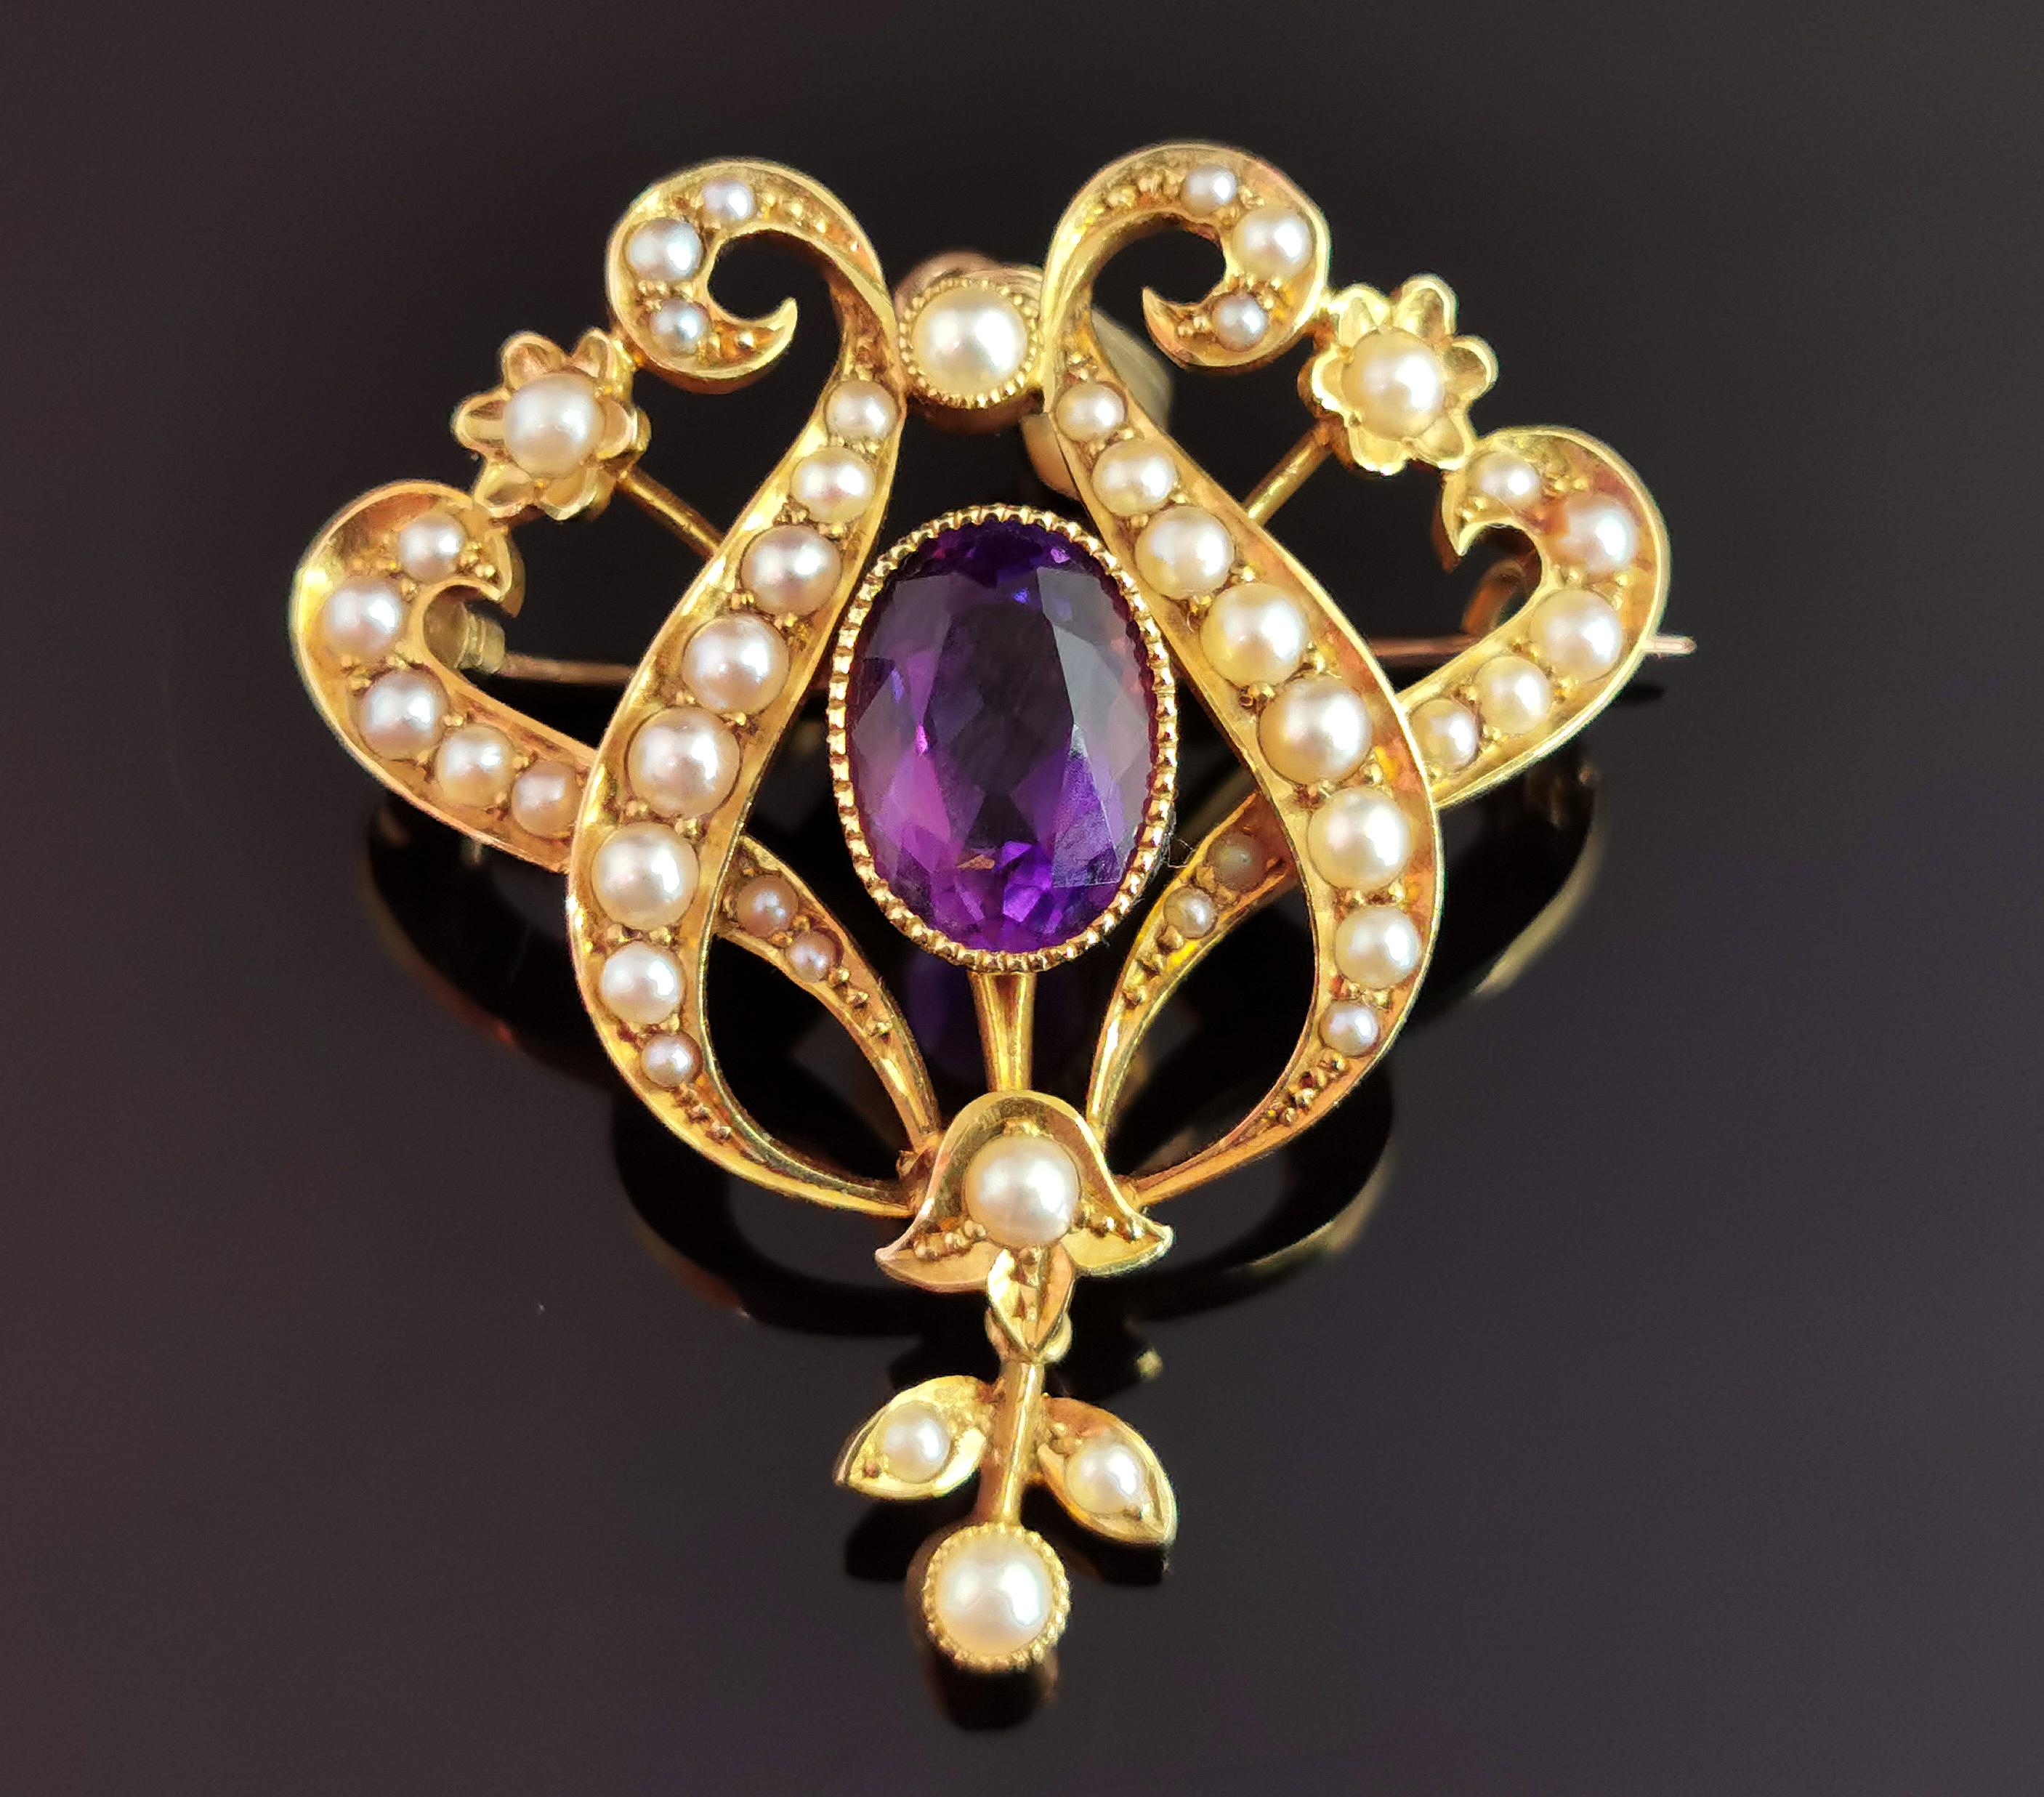 Antique Art Nouveau Amethyst and Pearl Pendant Brooch, 15kt Yellow Gold 8